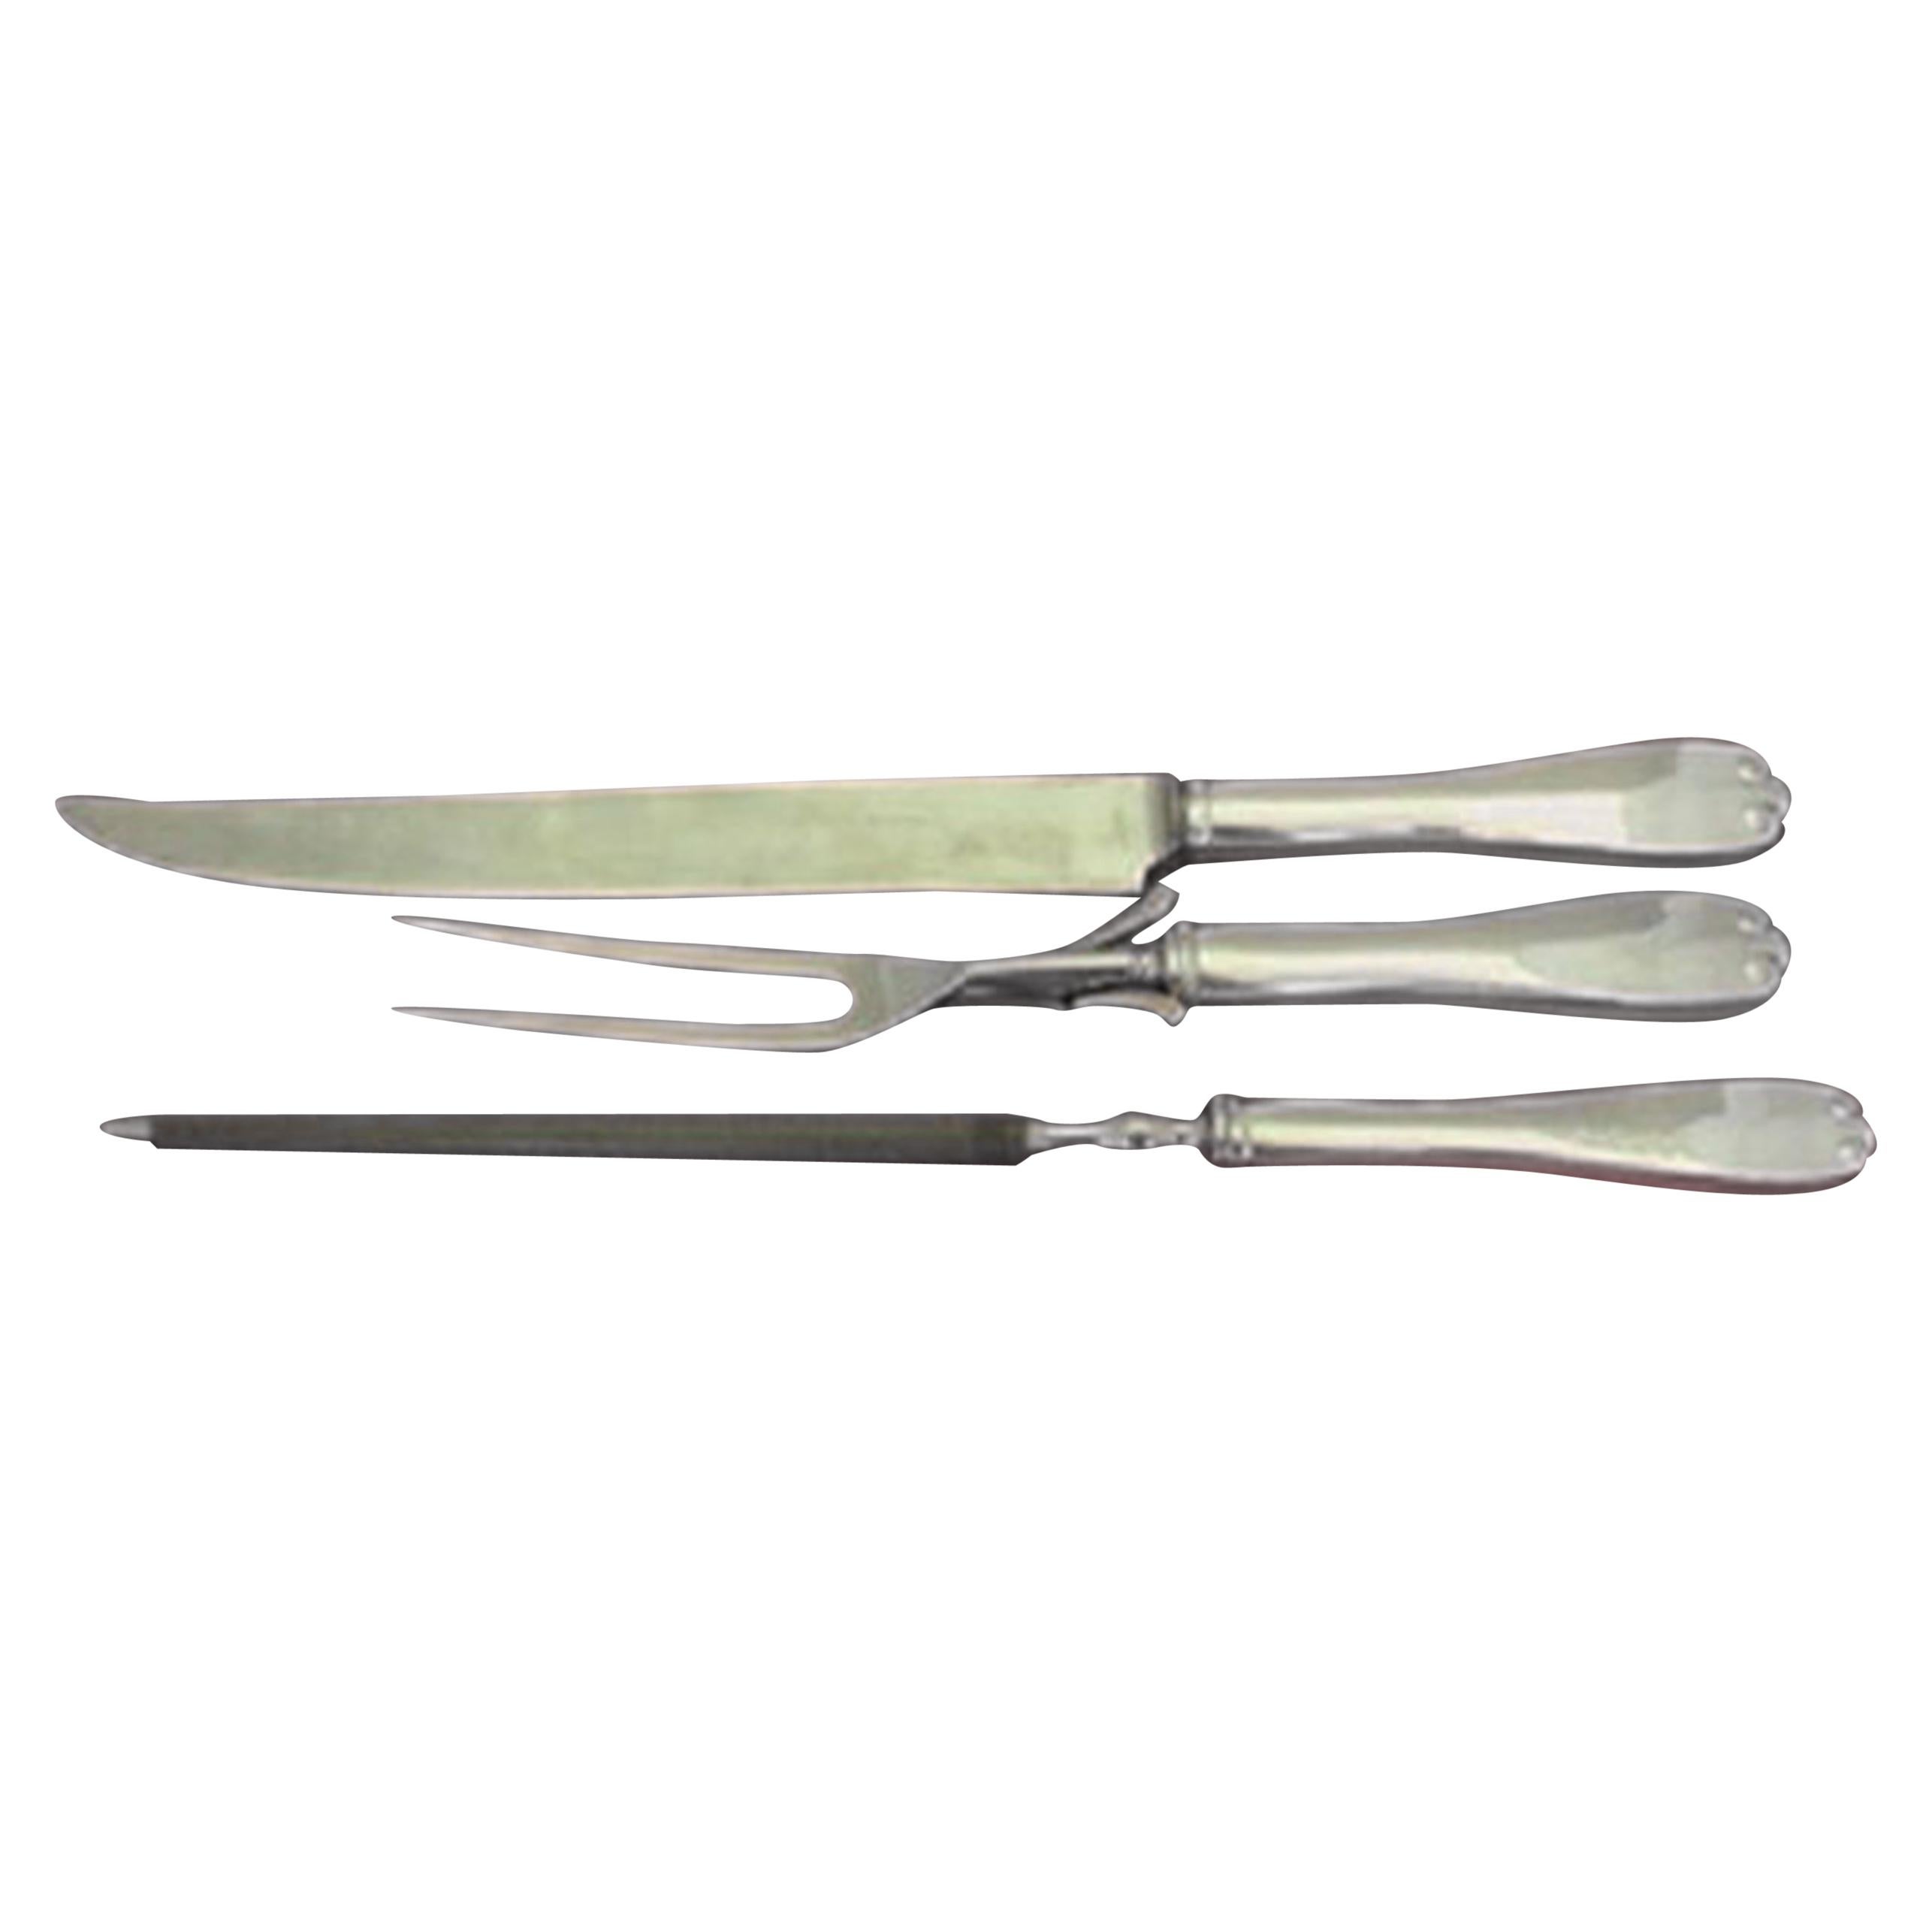 Flemish by Tiffany & Co. Sterling Silver Roast Carving Set 3-Piece